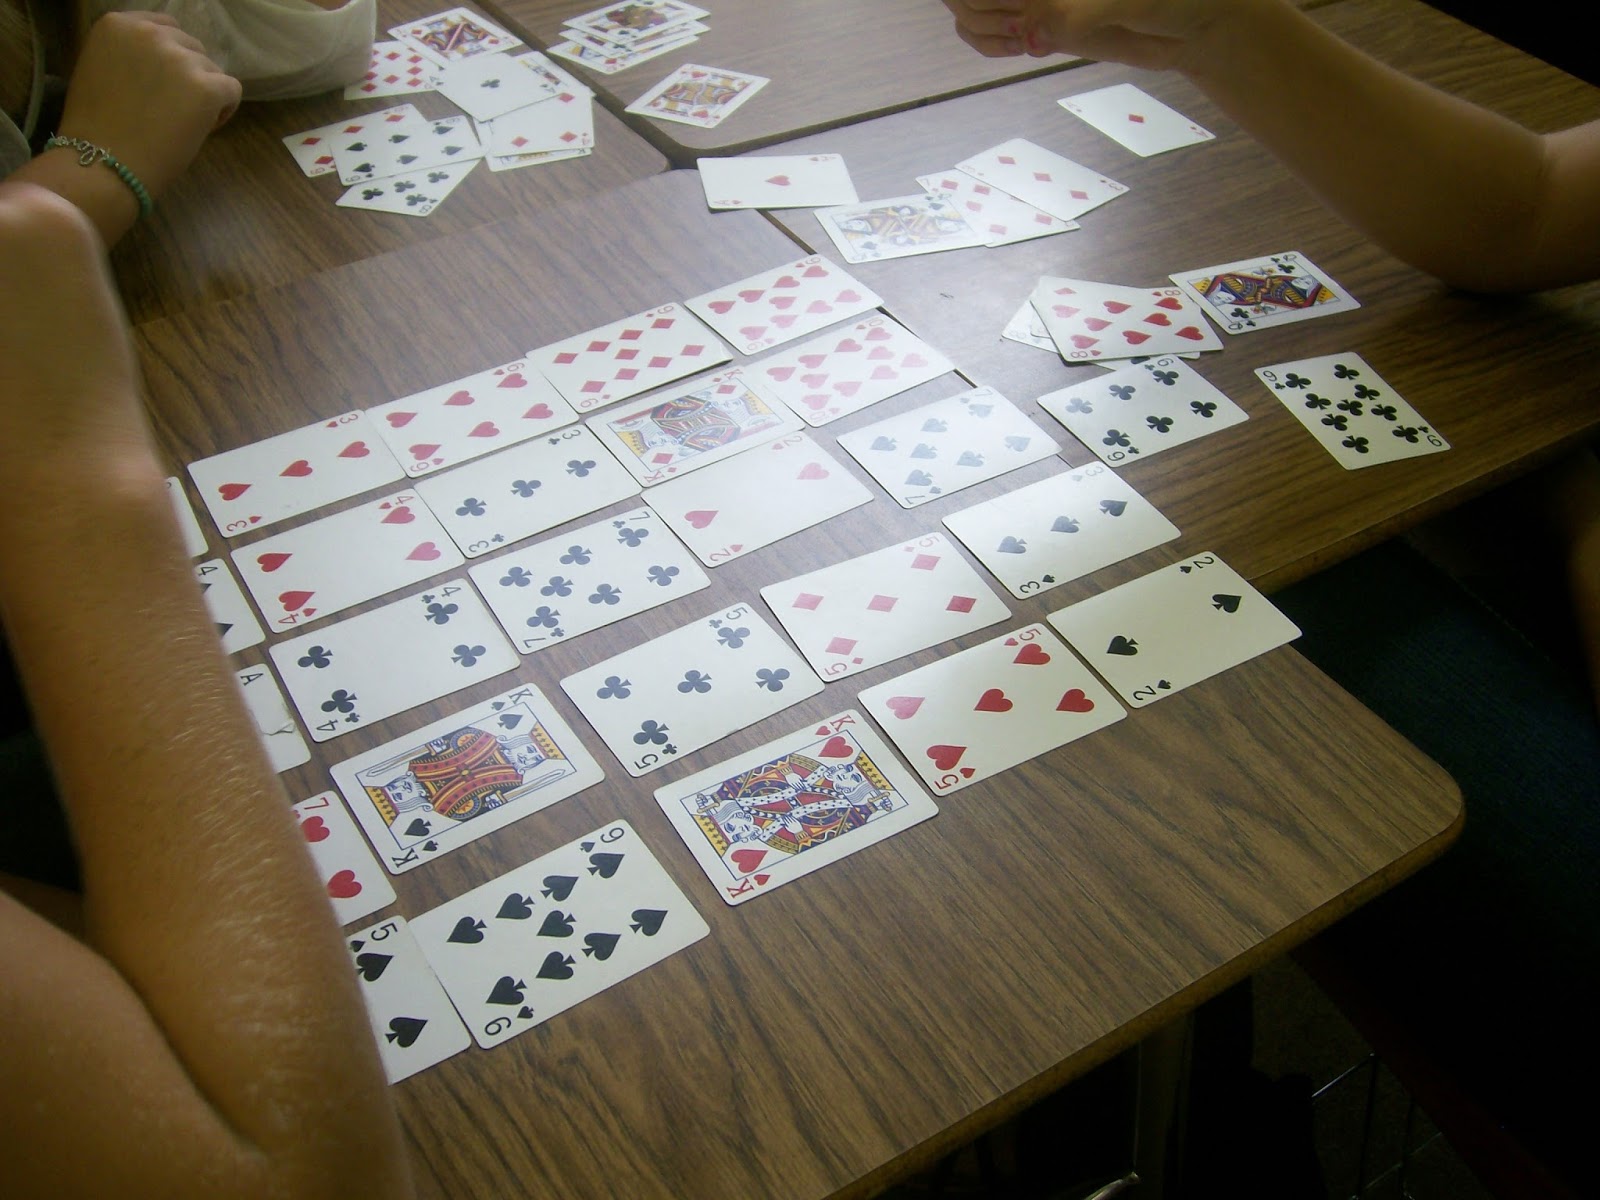 Students working on 31-derful playing card puzzle. 